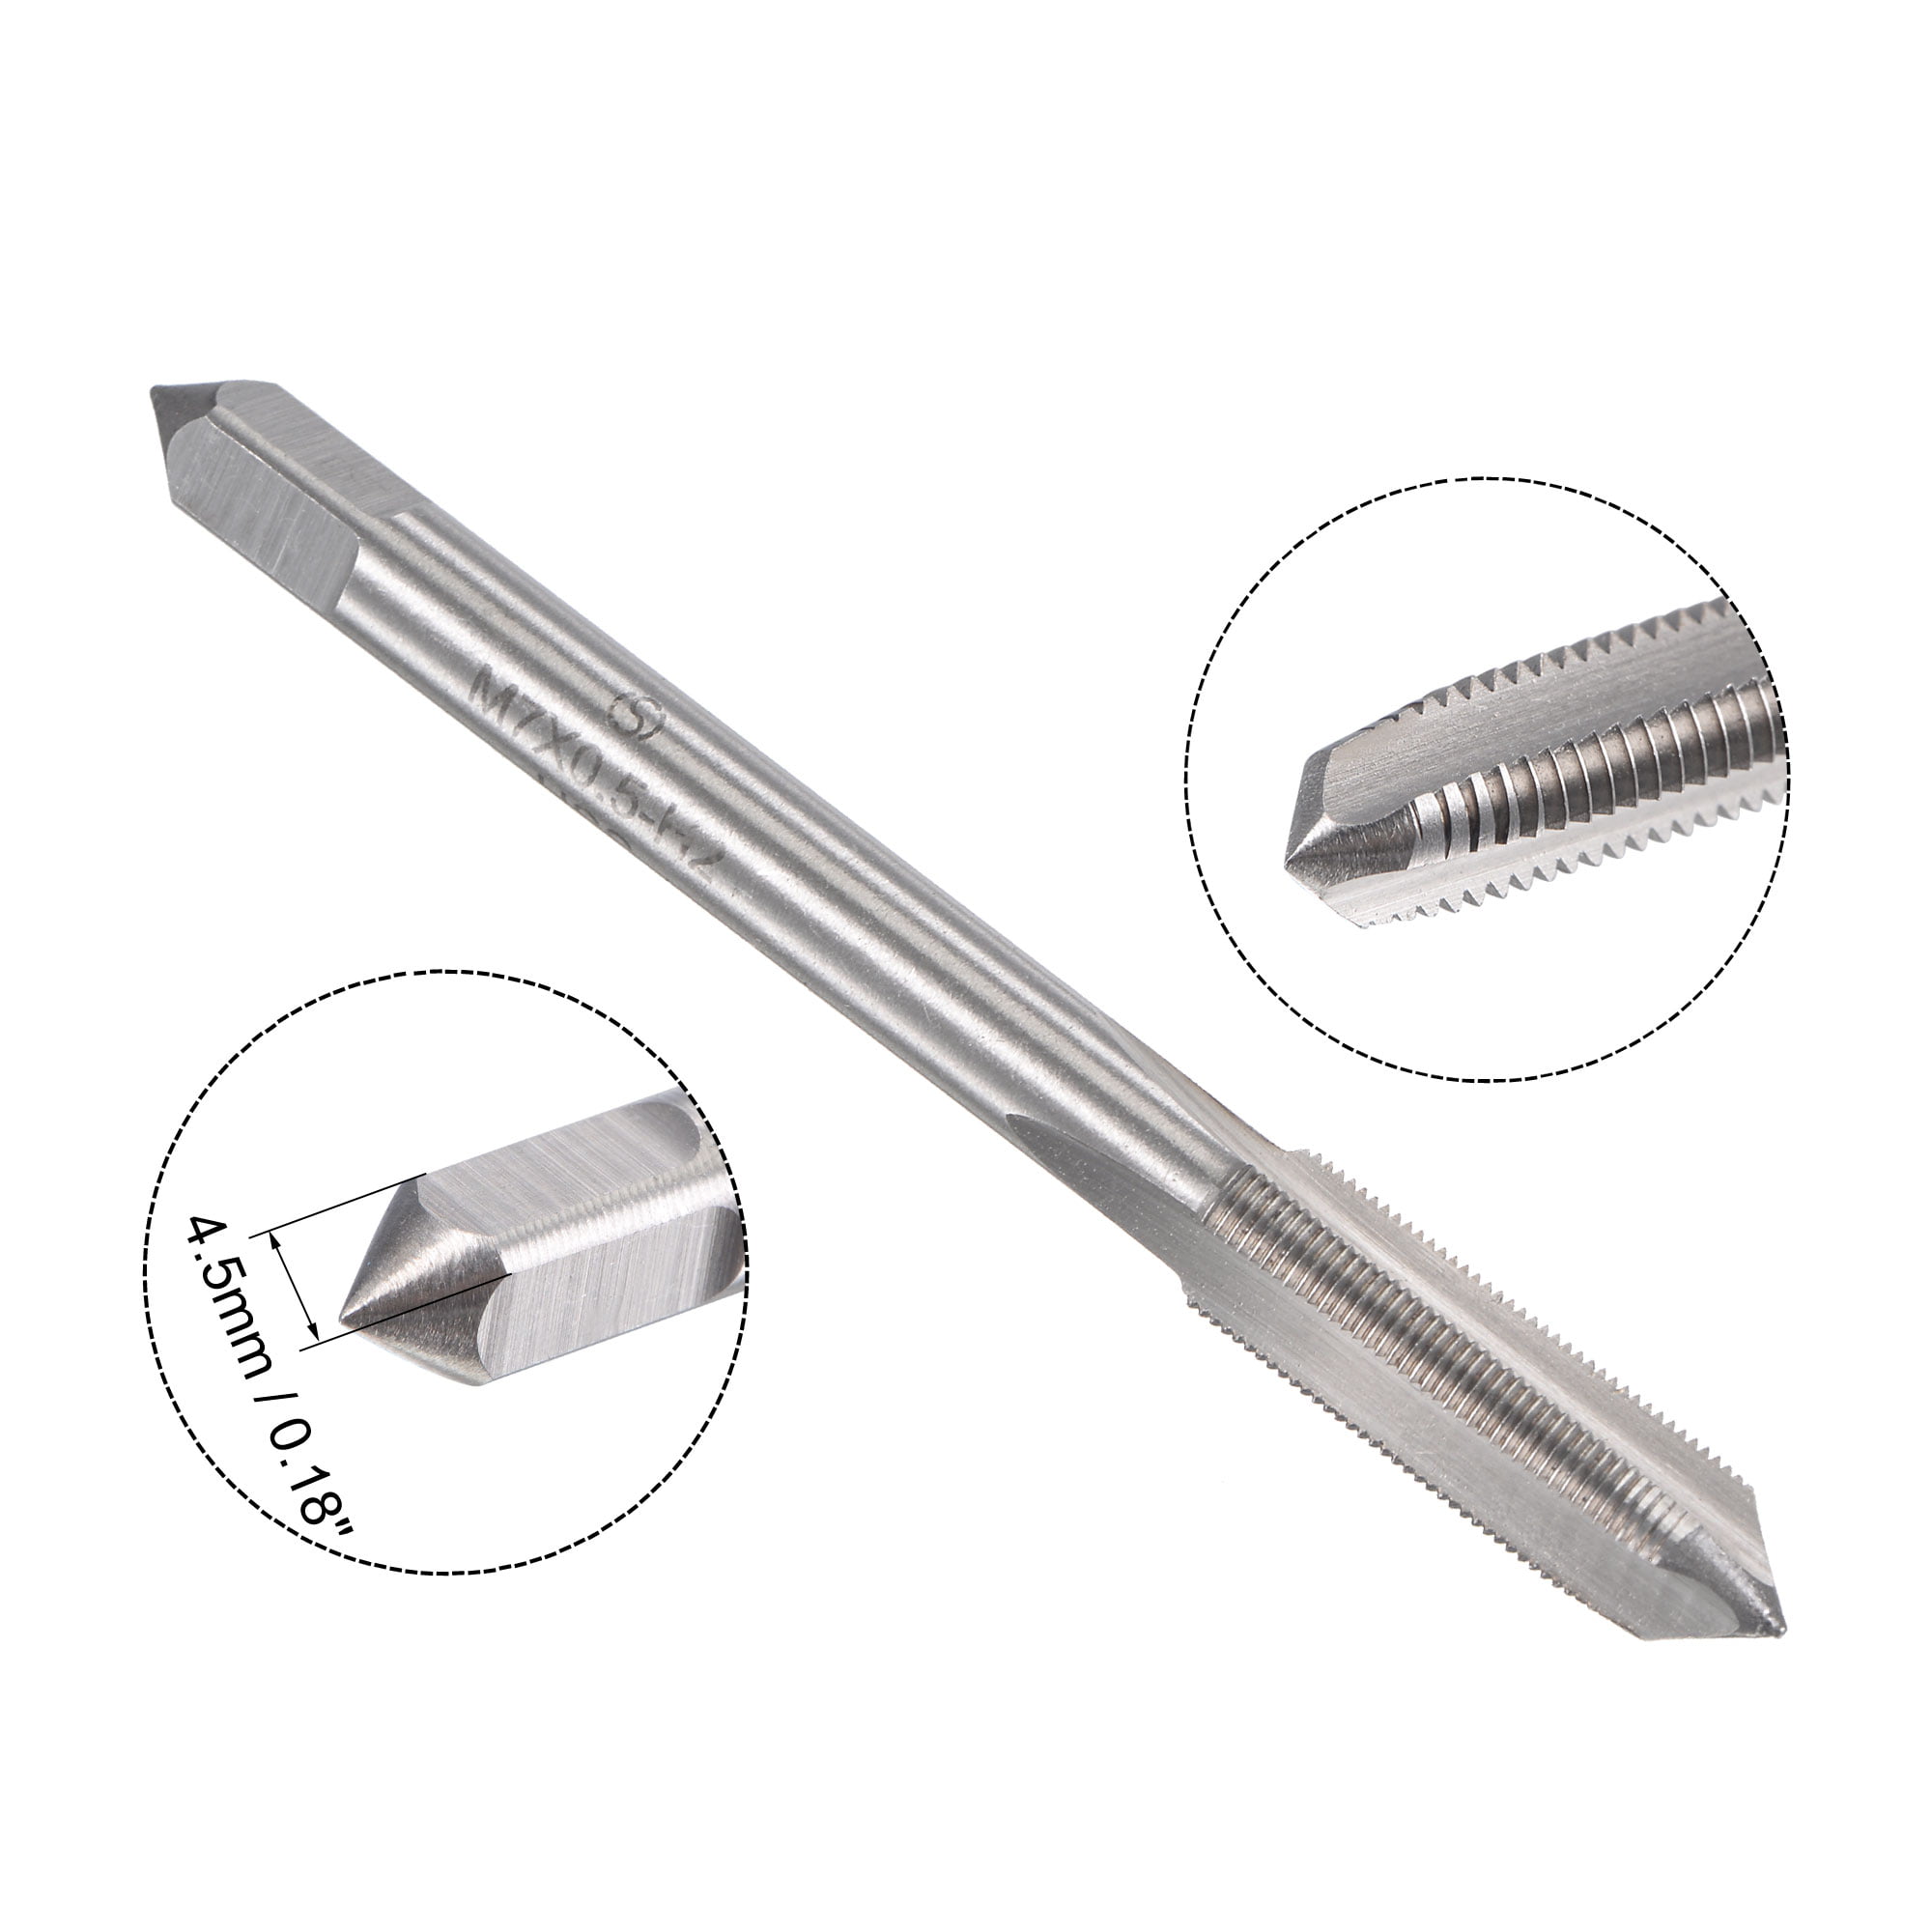 Metric Right Hand Die and Tap,Threading Tools Dies and Taps,M7 x 0.75 mm,1 Set